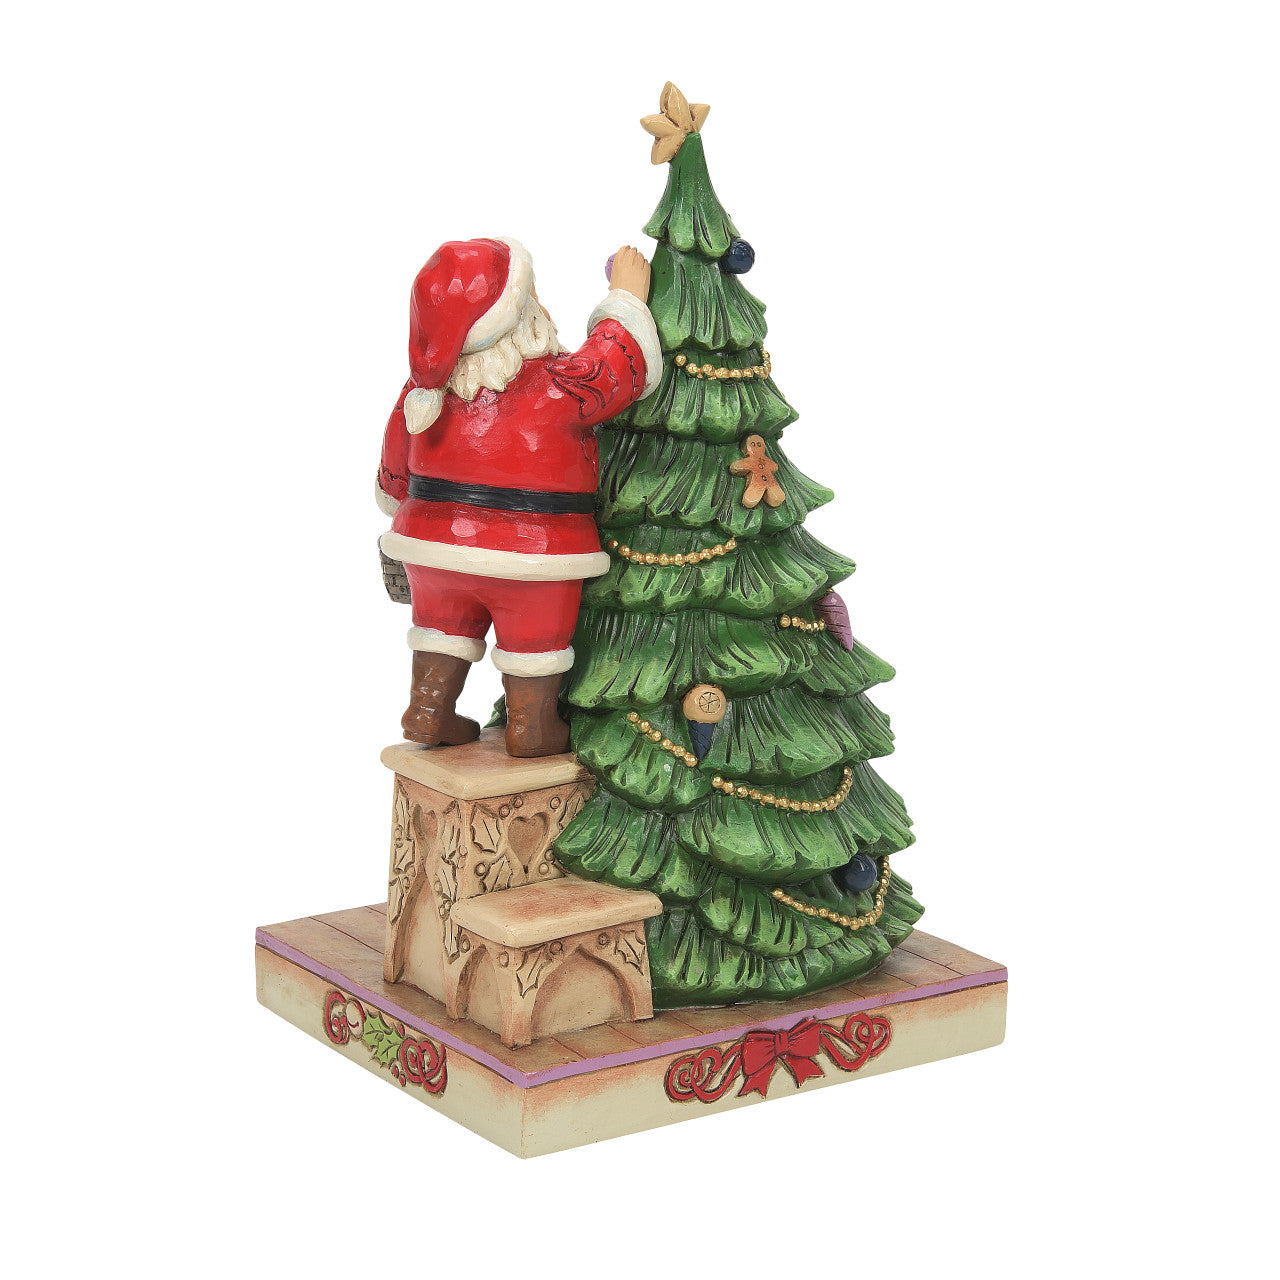 The Most Wonderful Time of the Year - Santa Decorating Tree Figurine